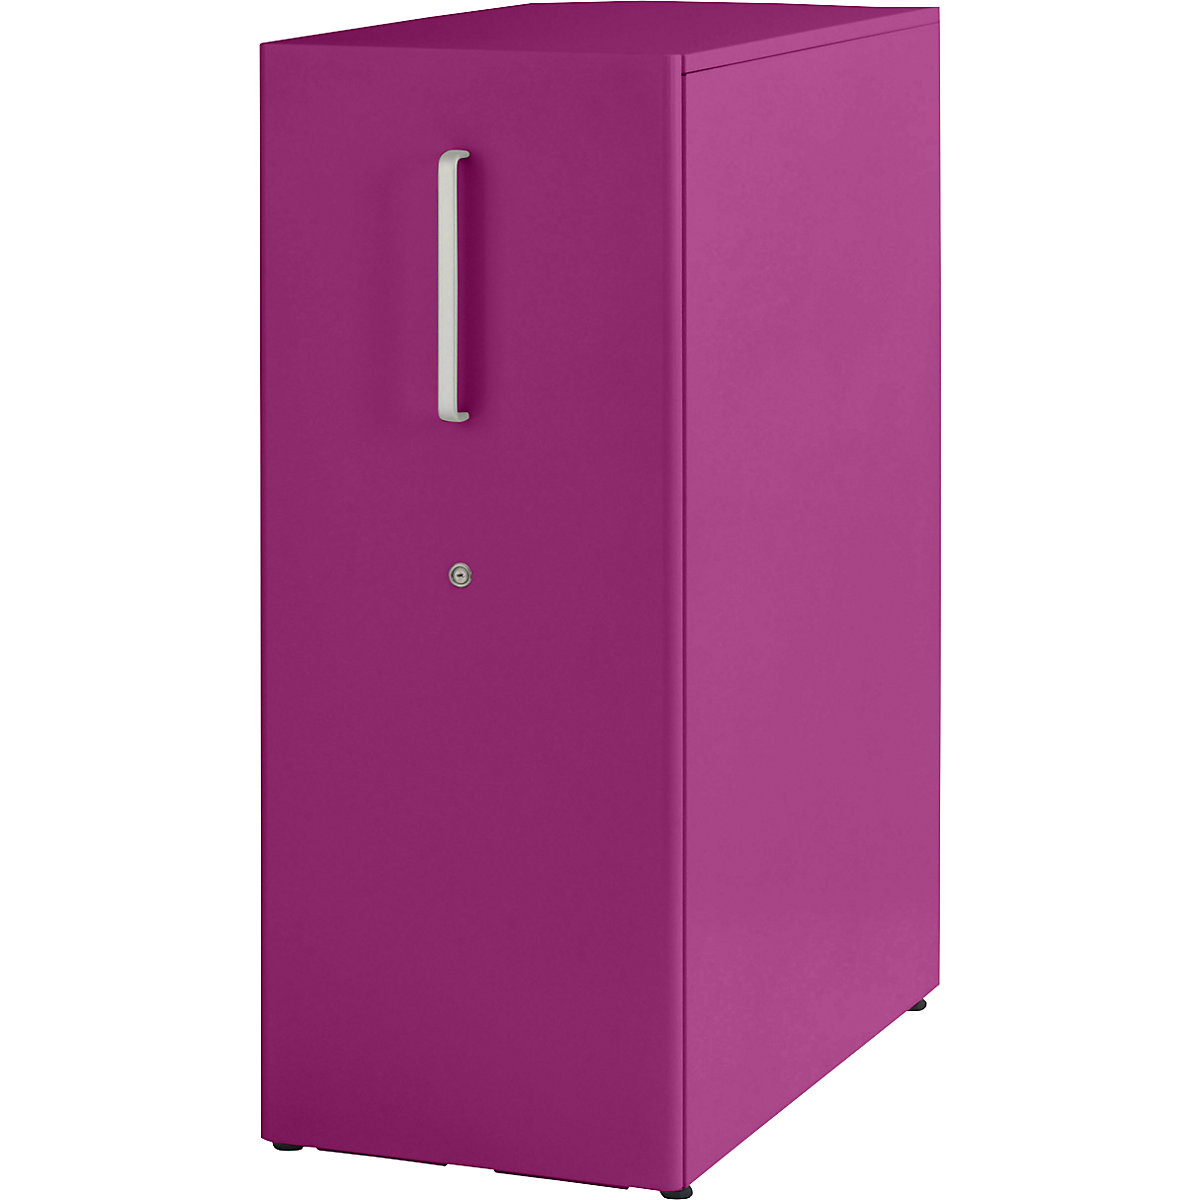 Tower™ 3 add-on furniture, with worktop – BISLEY, for the right side, 1 shelf, fuchsia-15